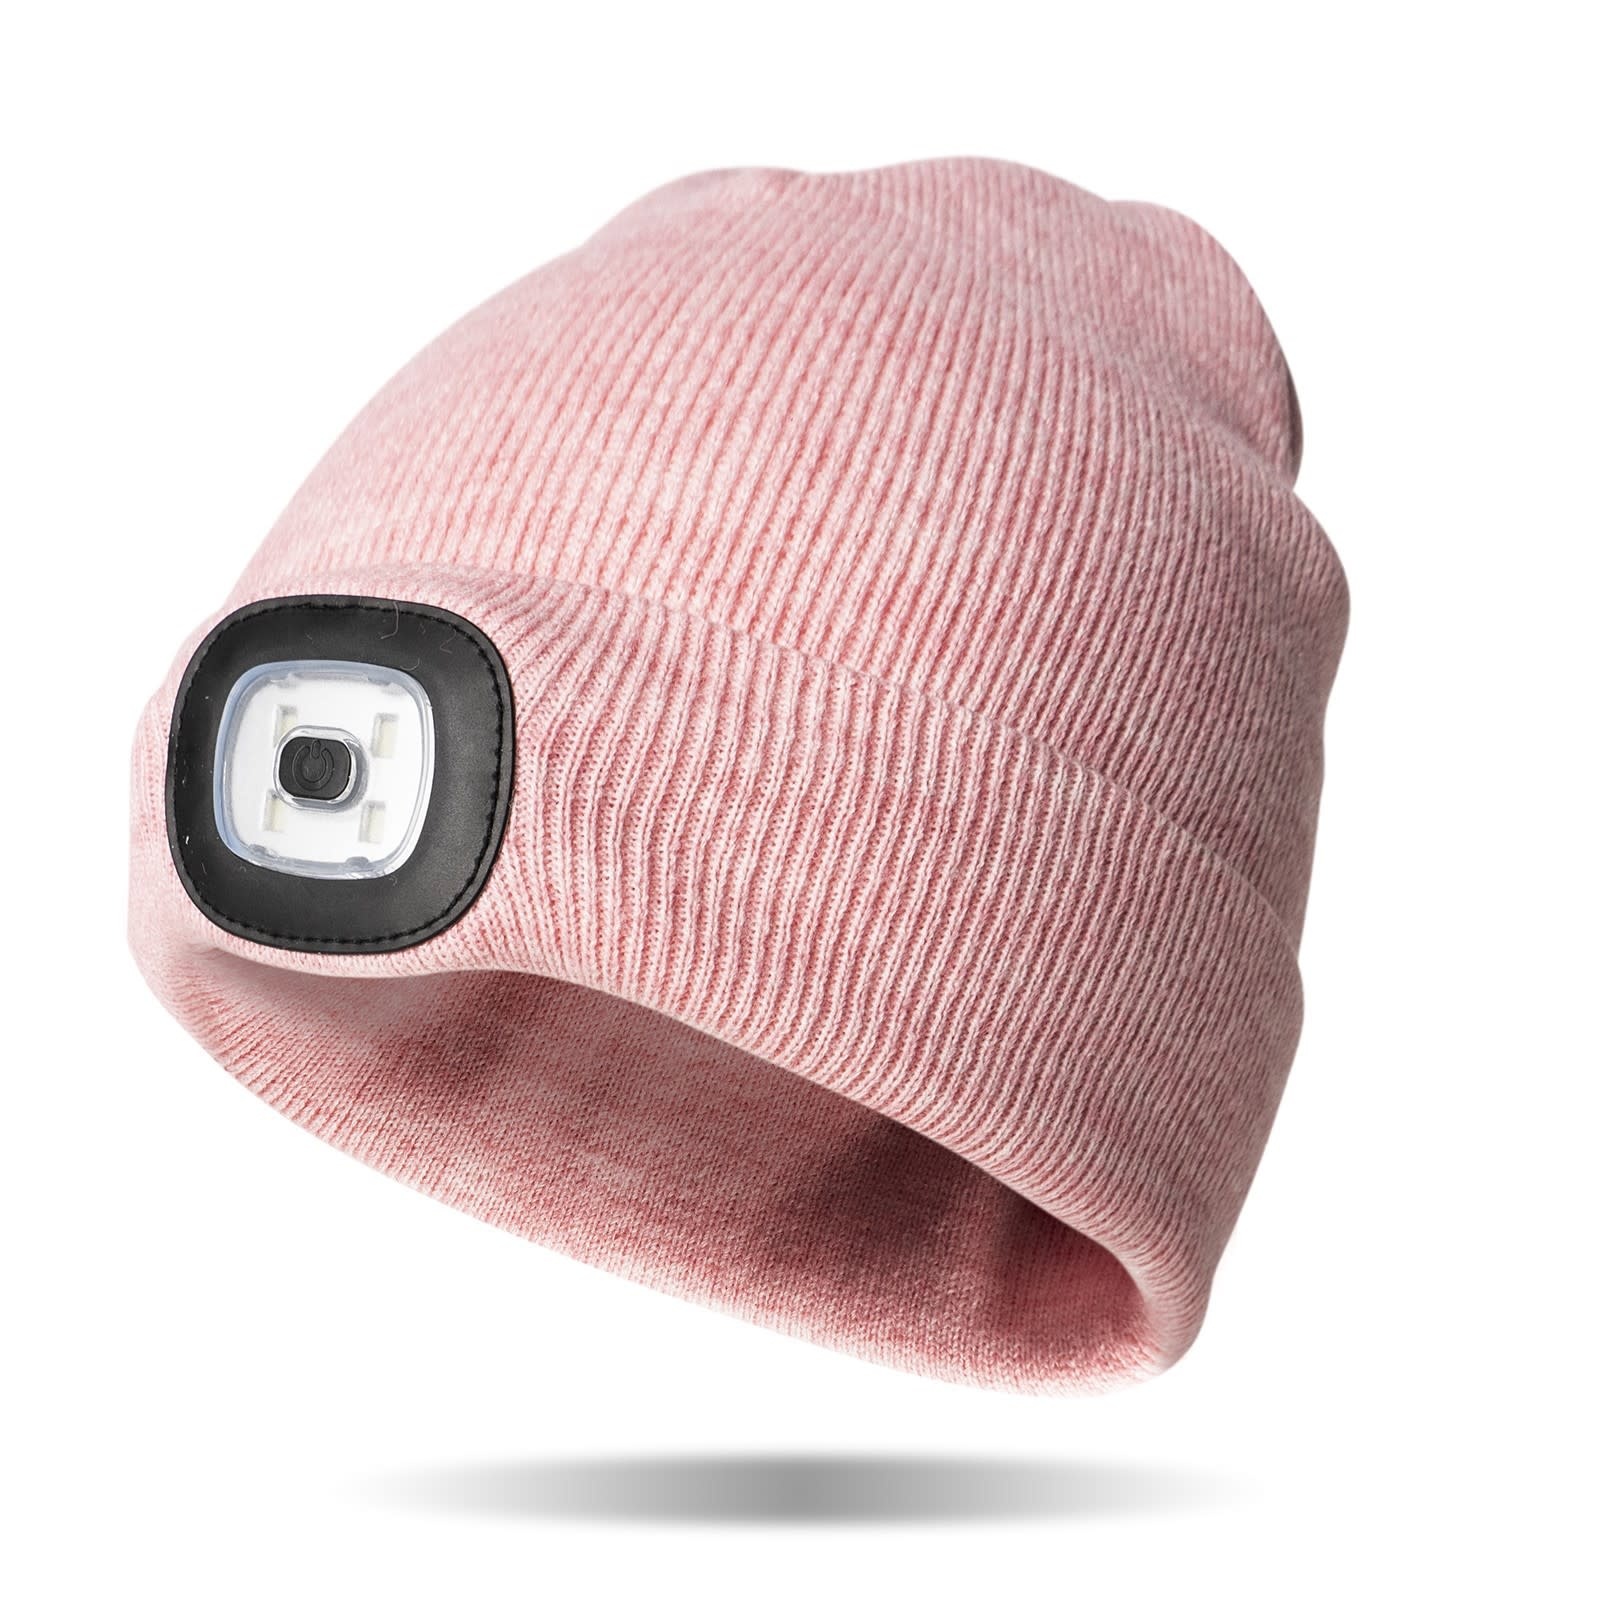 Night Scout Night Scout LED Flashlight LIGHT PINK Knit Beanie Hat (USB rechargeable)